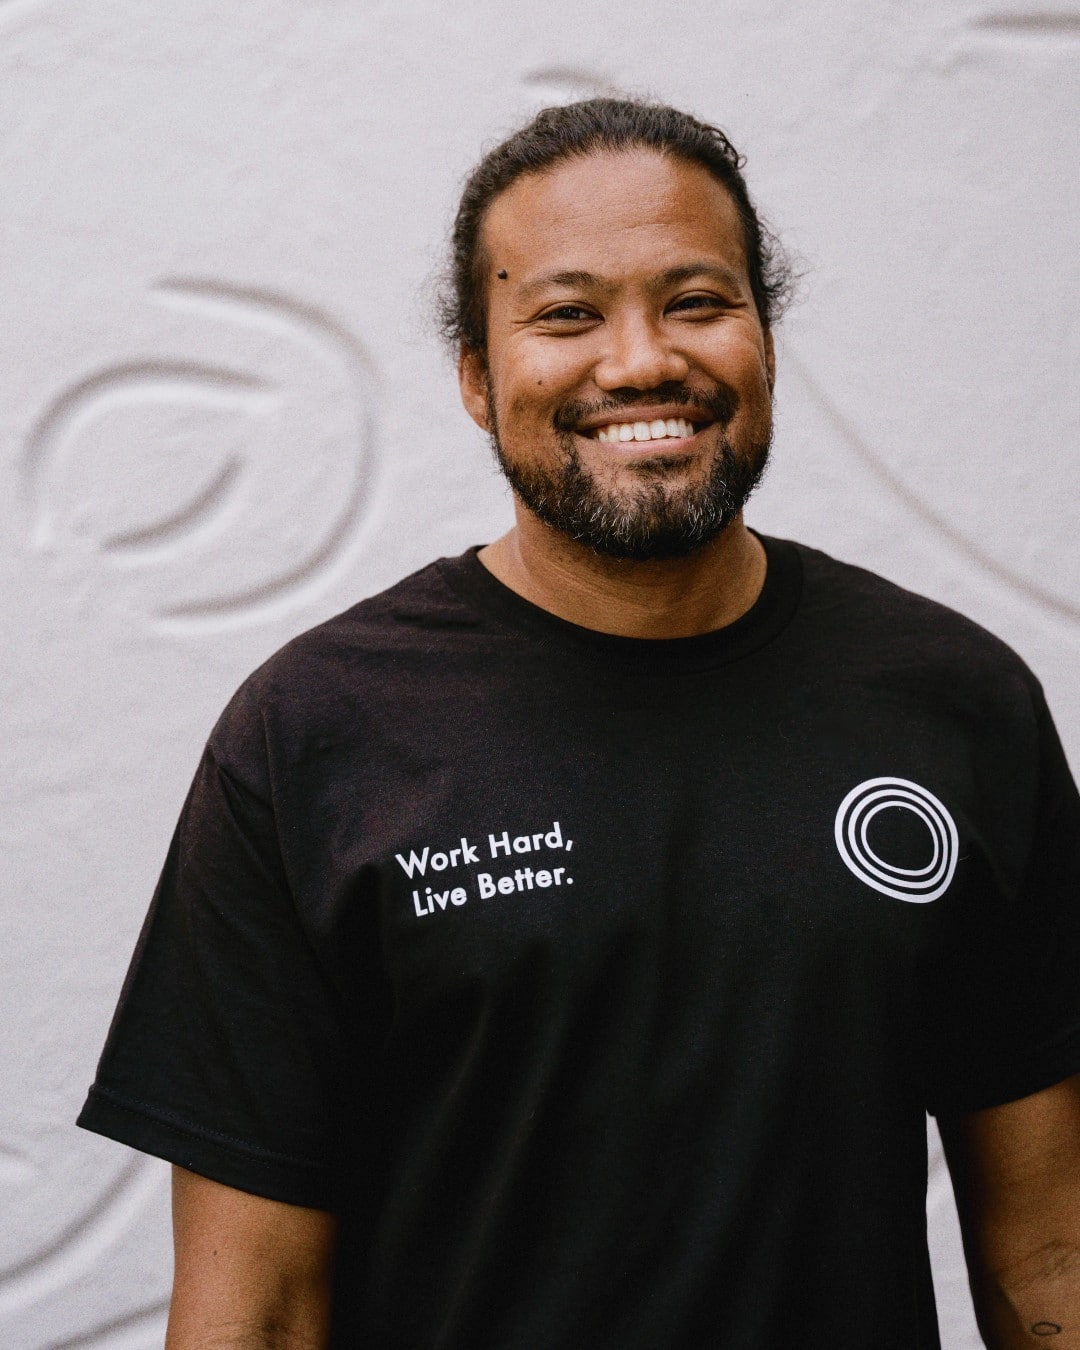 In honor of Black History Month and National Entrepreneurship Week, we’re celebrating our neighbor, @theboxjelly and owner Rechung Fujihira for providing a co-working space allowing entrepreneurs to thrive. Click the link in our bio to learn more about how BoxJelly cultivates an inspiring work experience with a uniquely local feel.